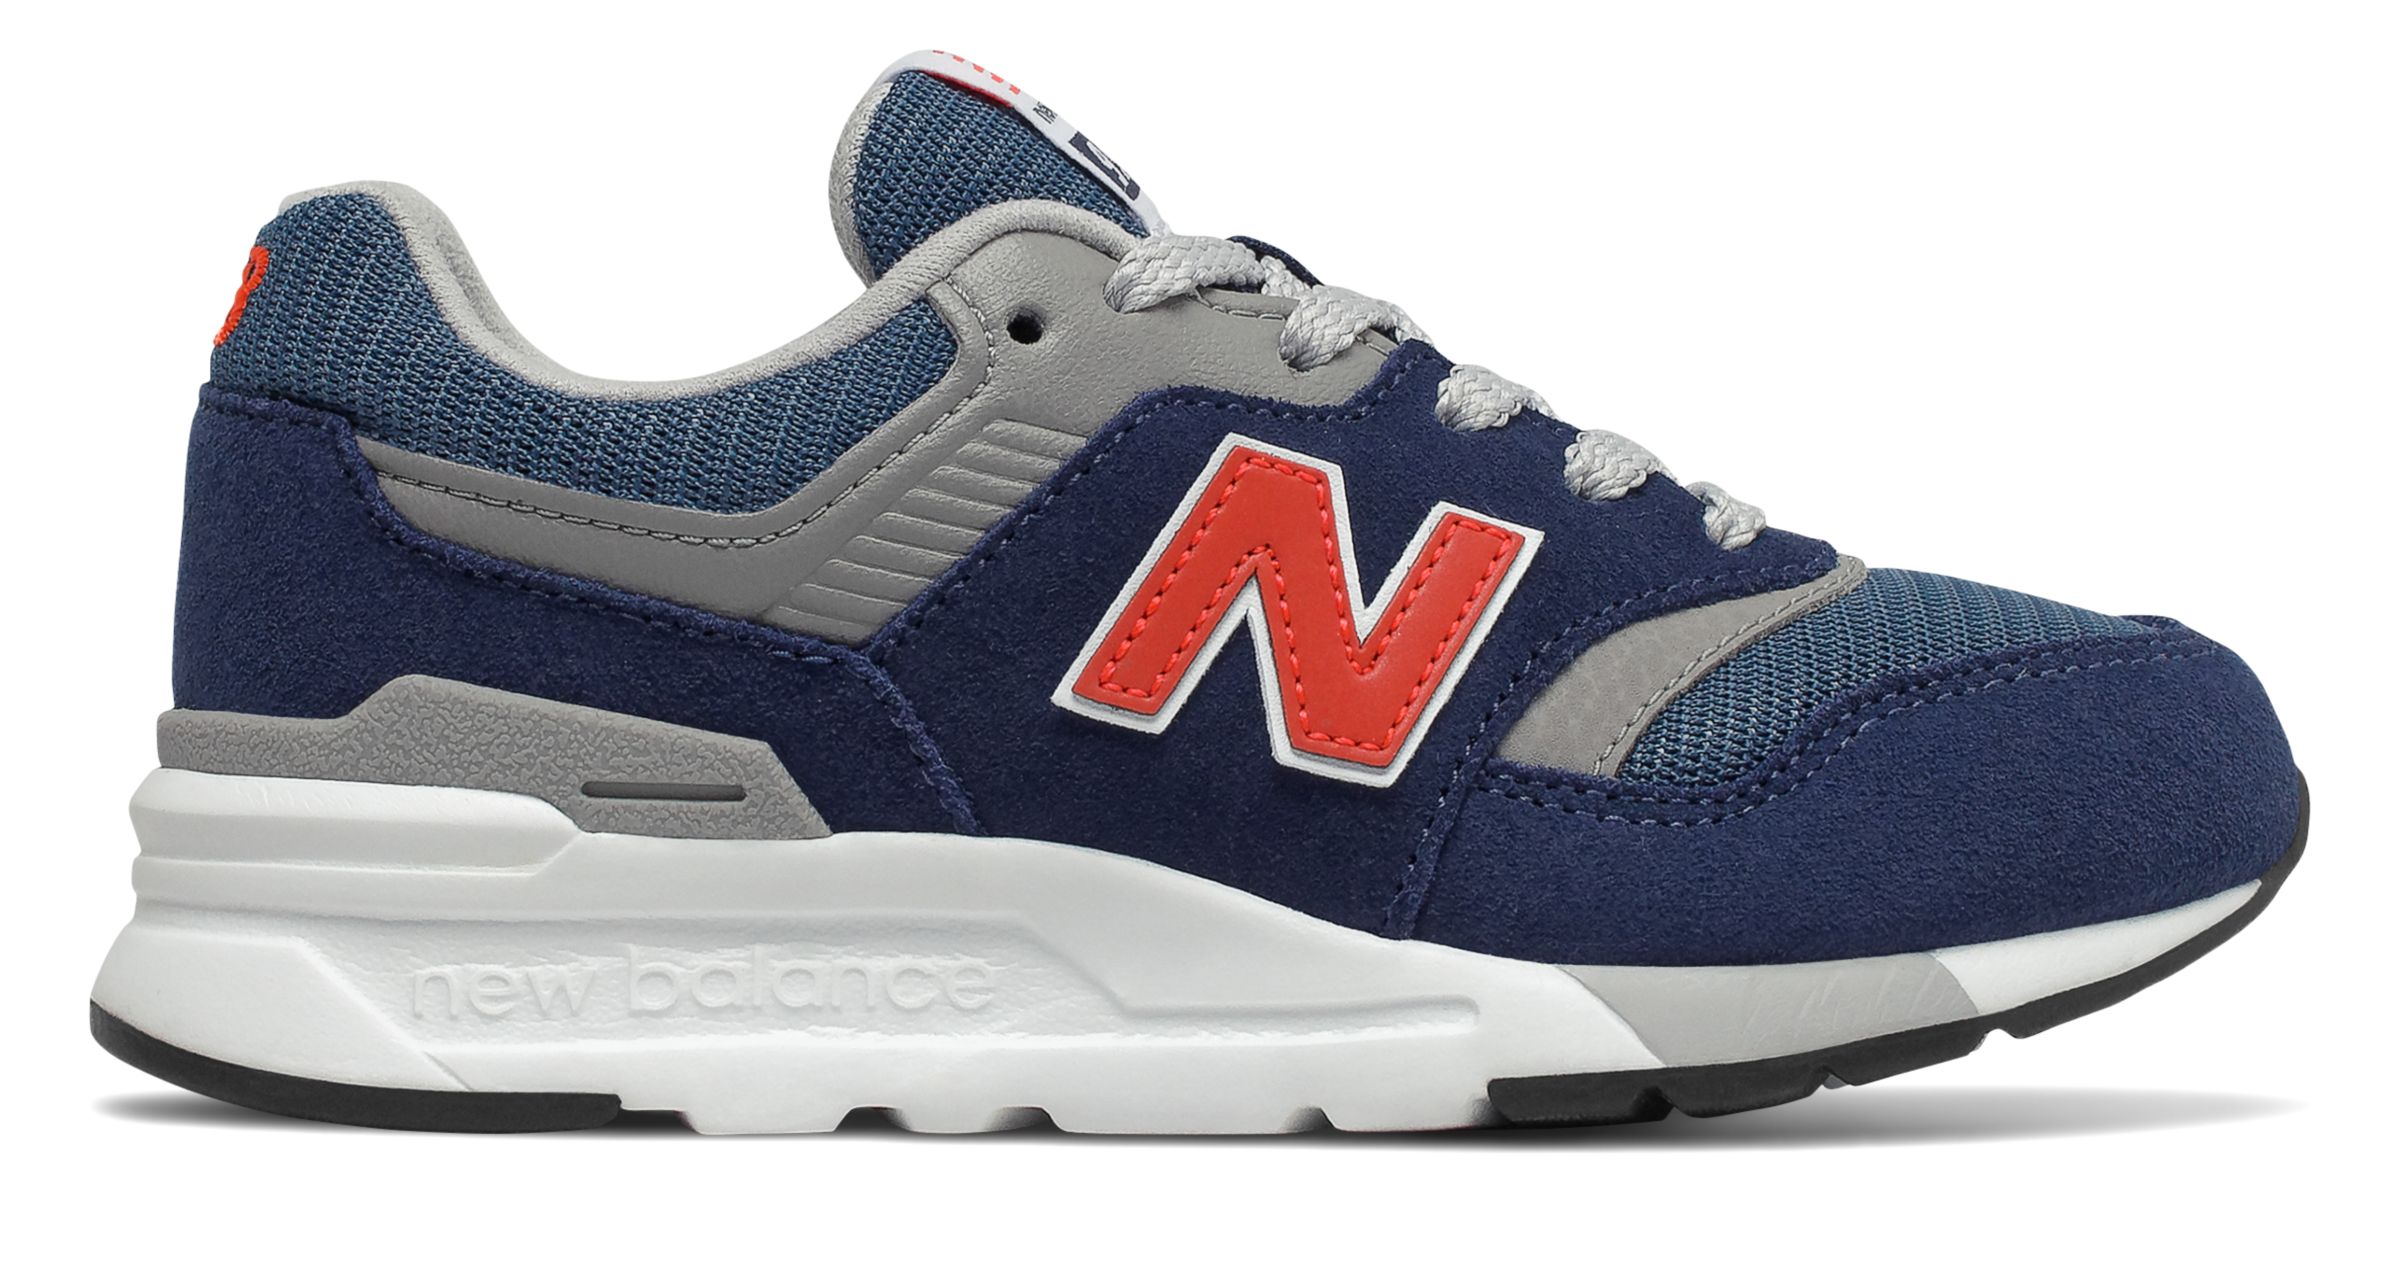 New Balance Kid's 997H Little Kids Male Shoes Navy with Red | eBay